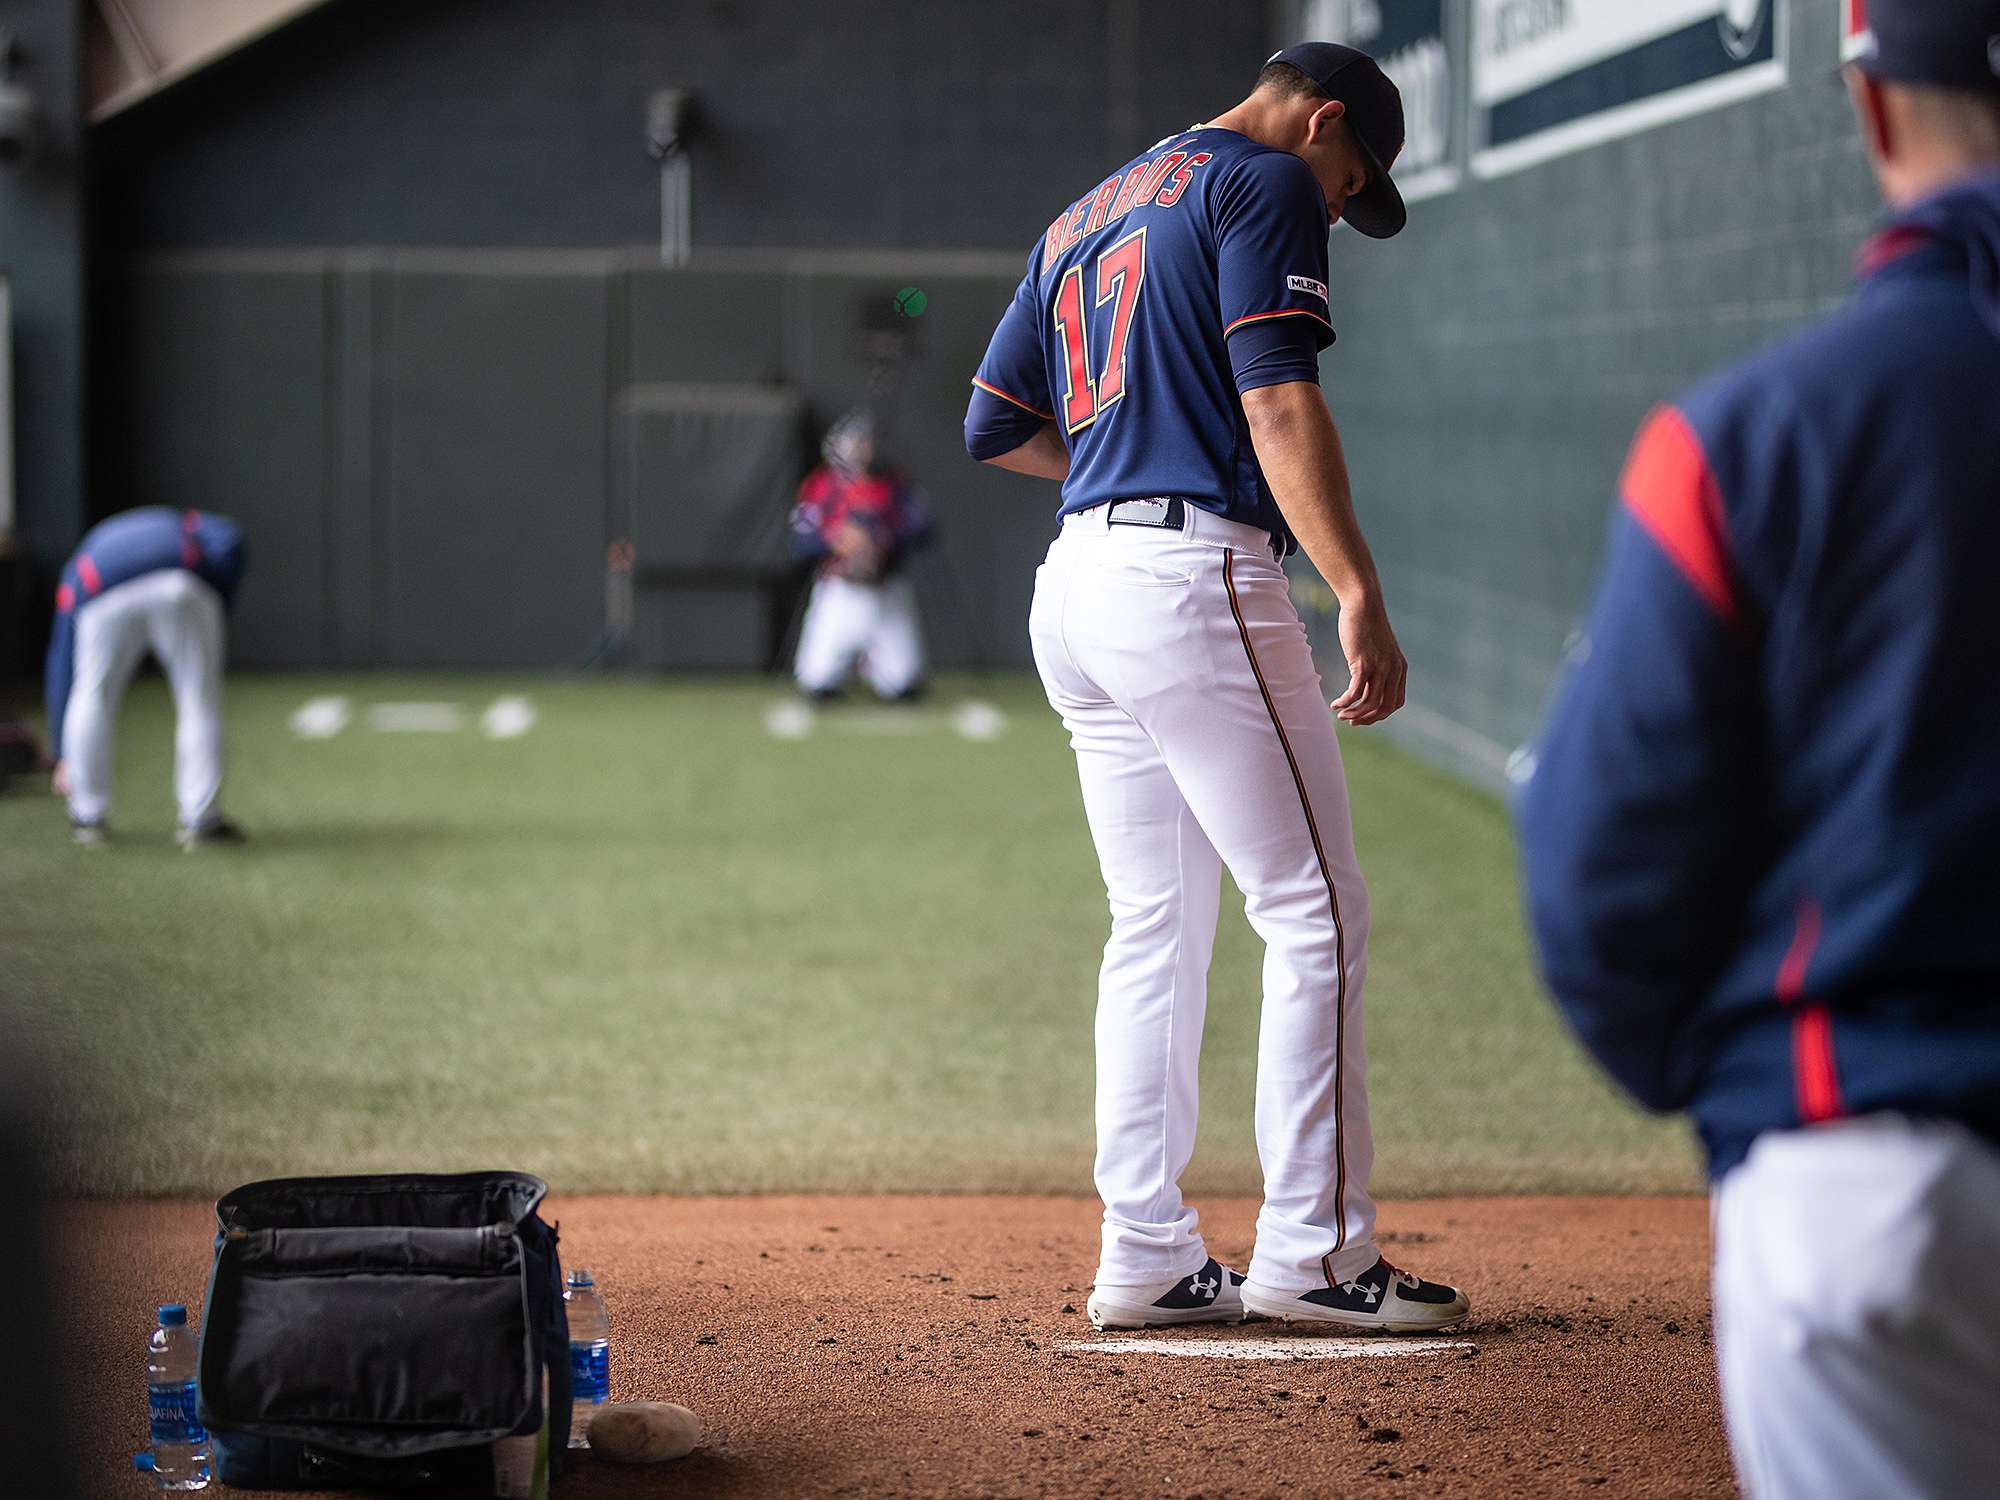 Twins are MLB's biggest surprise, led by Berrios and Perez